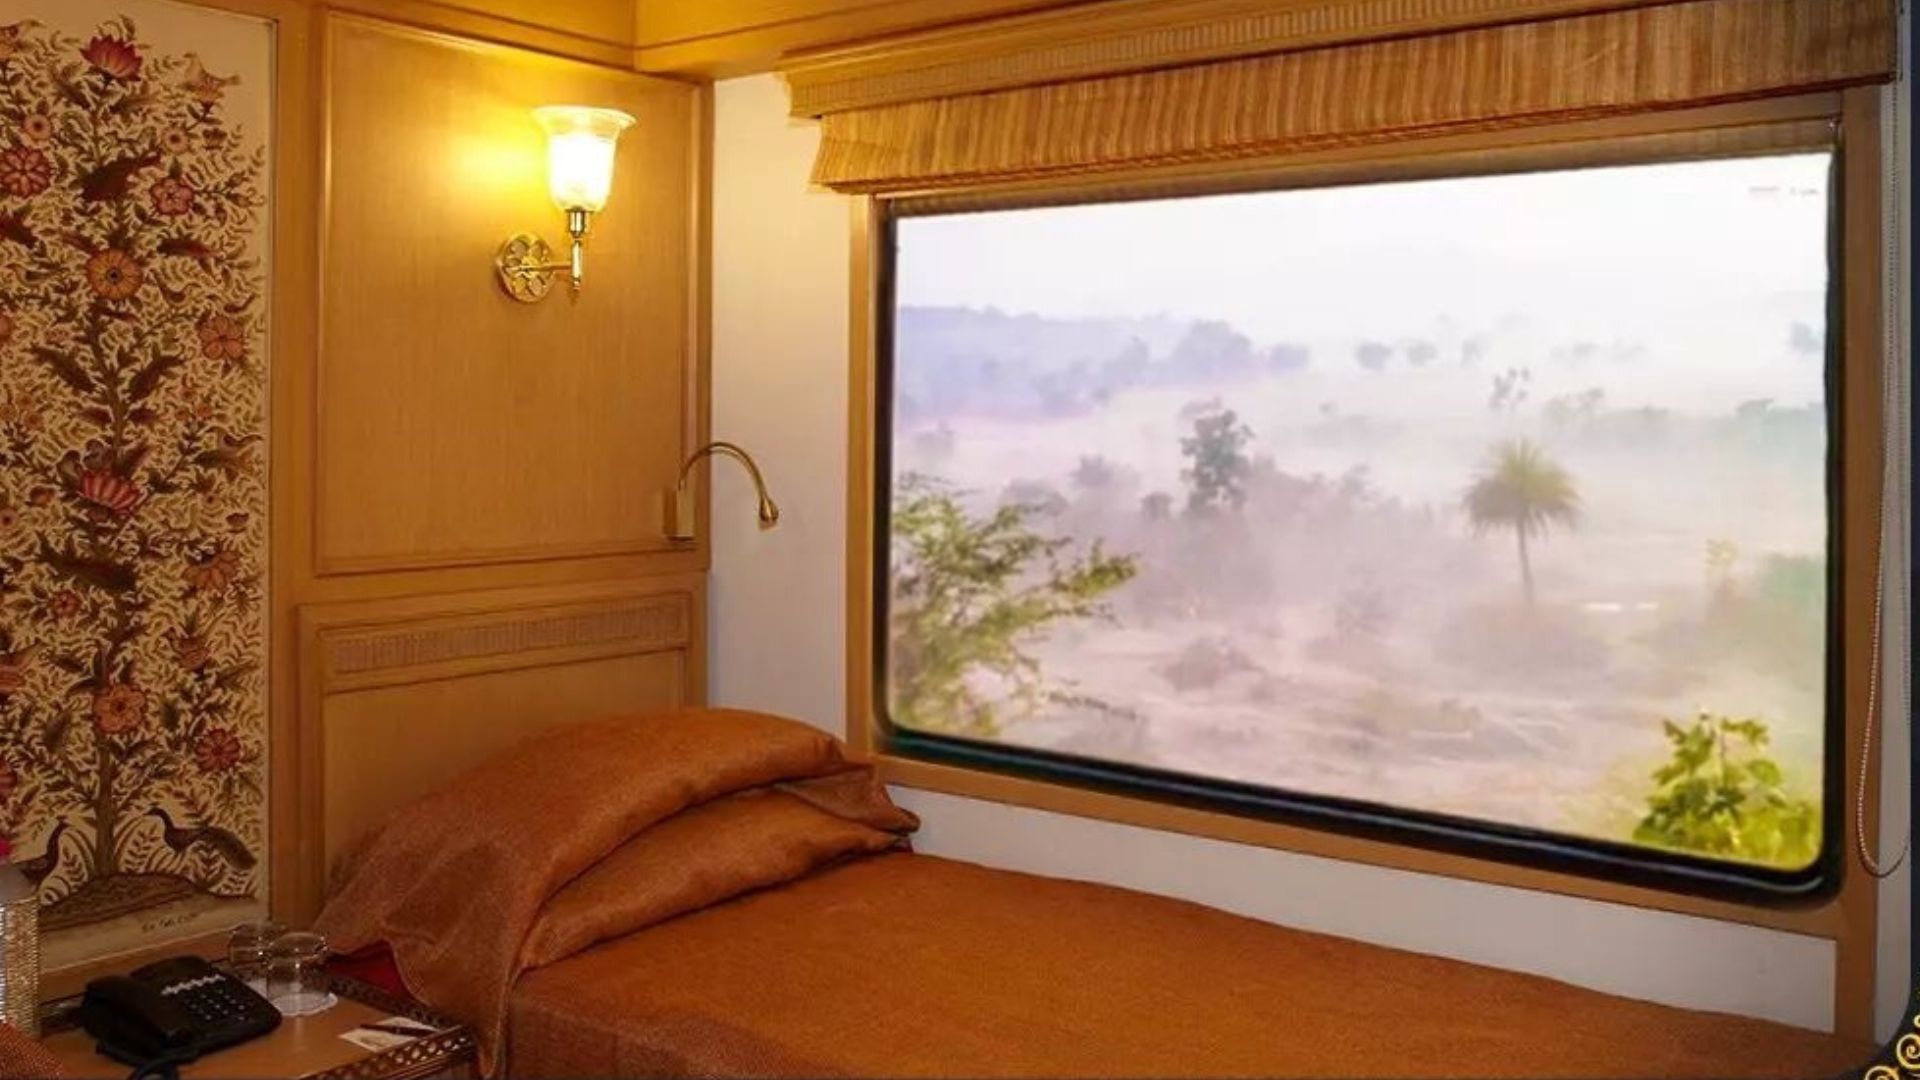 Luxury Train Journeys Are Here, As Maharajas' Express Returns To Tracks